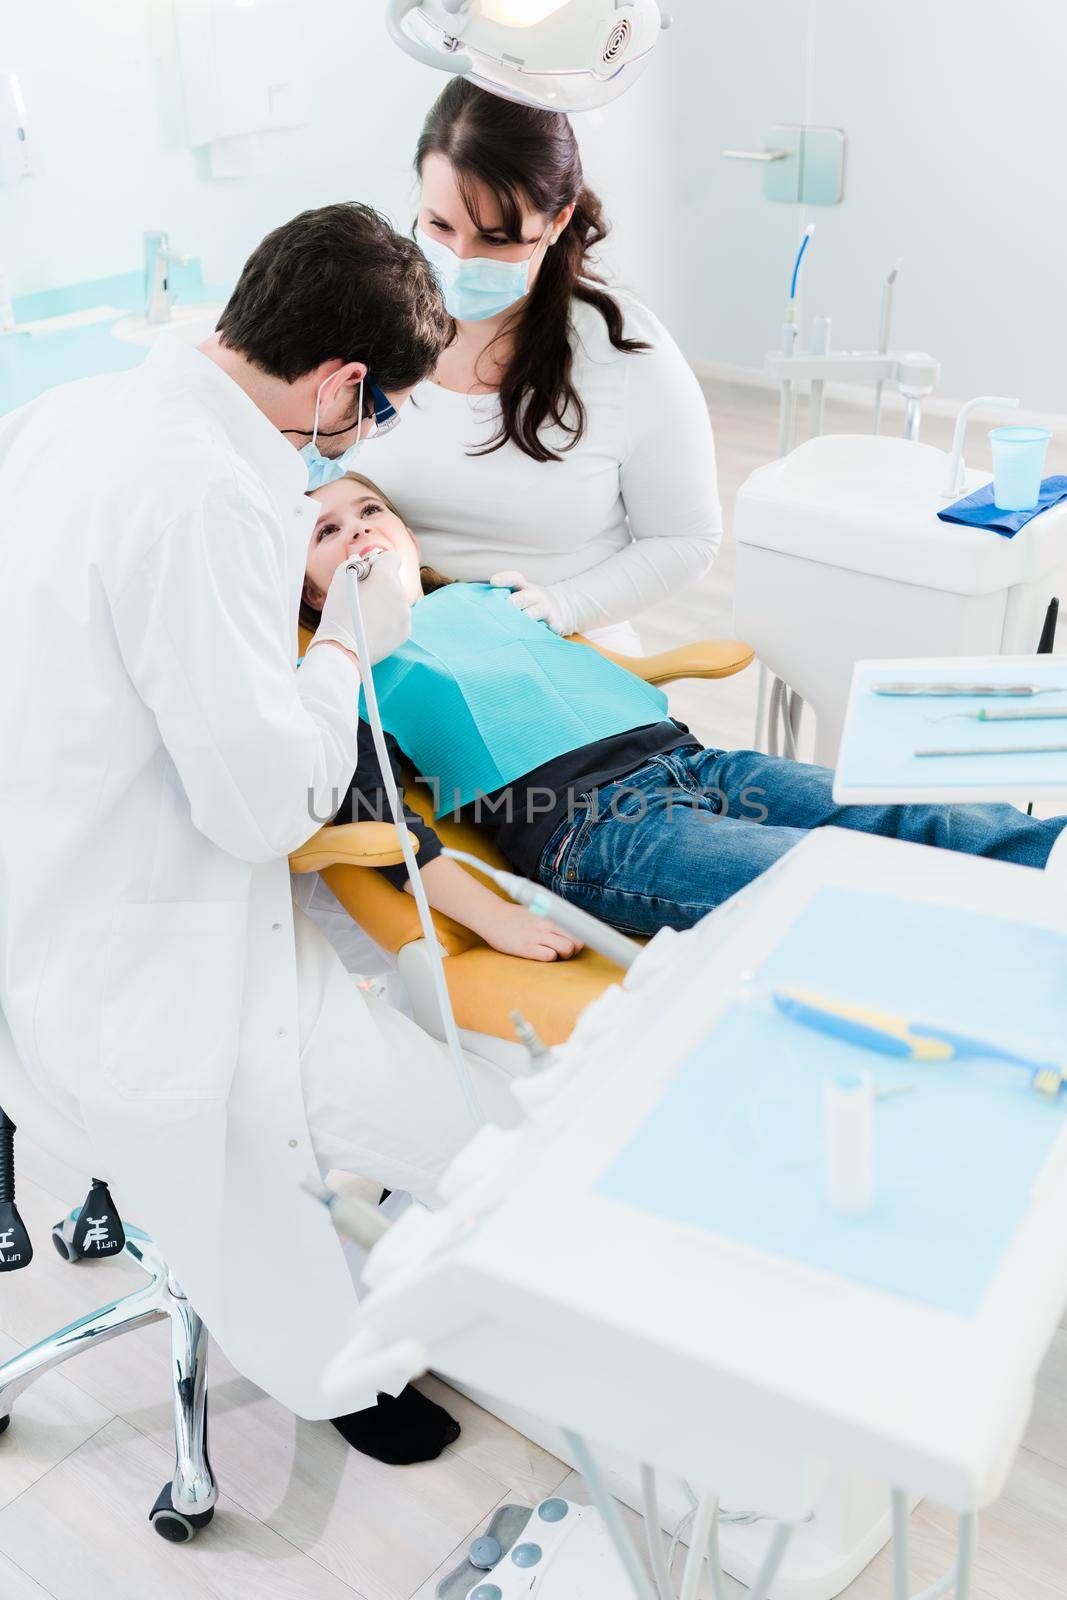 Dentist trearing child in his surgery, there is no need to drill a tooth